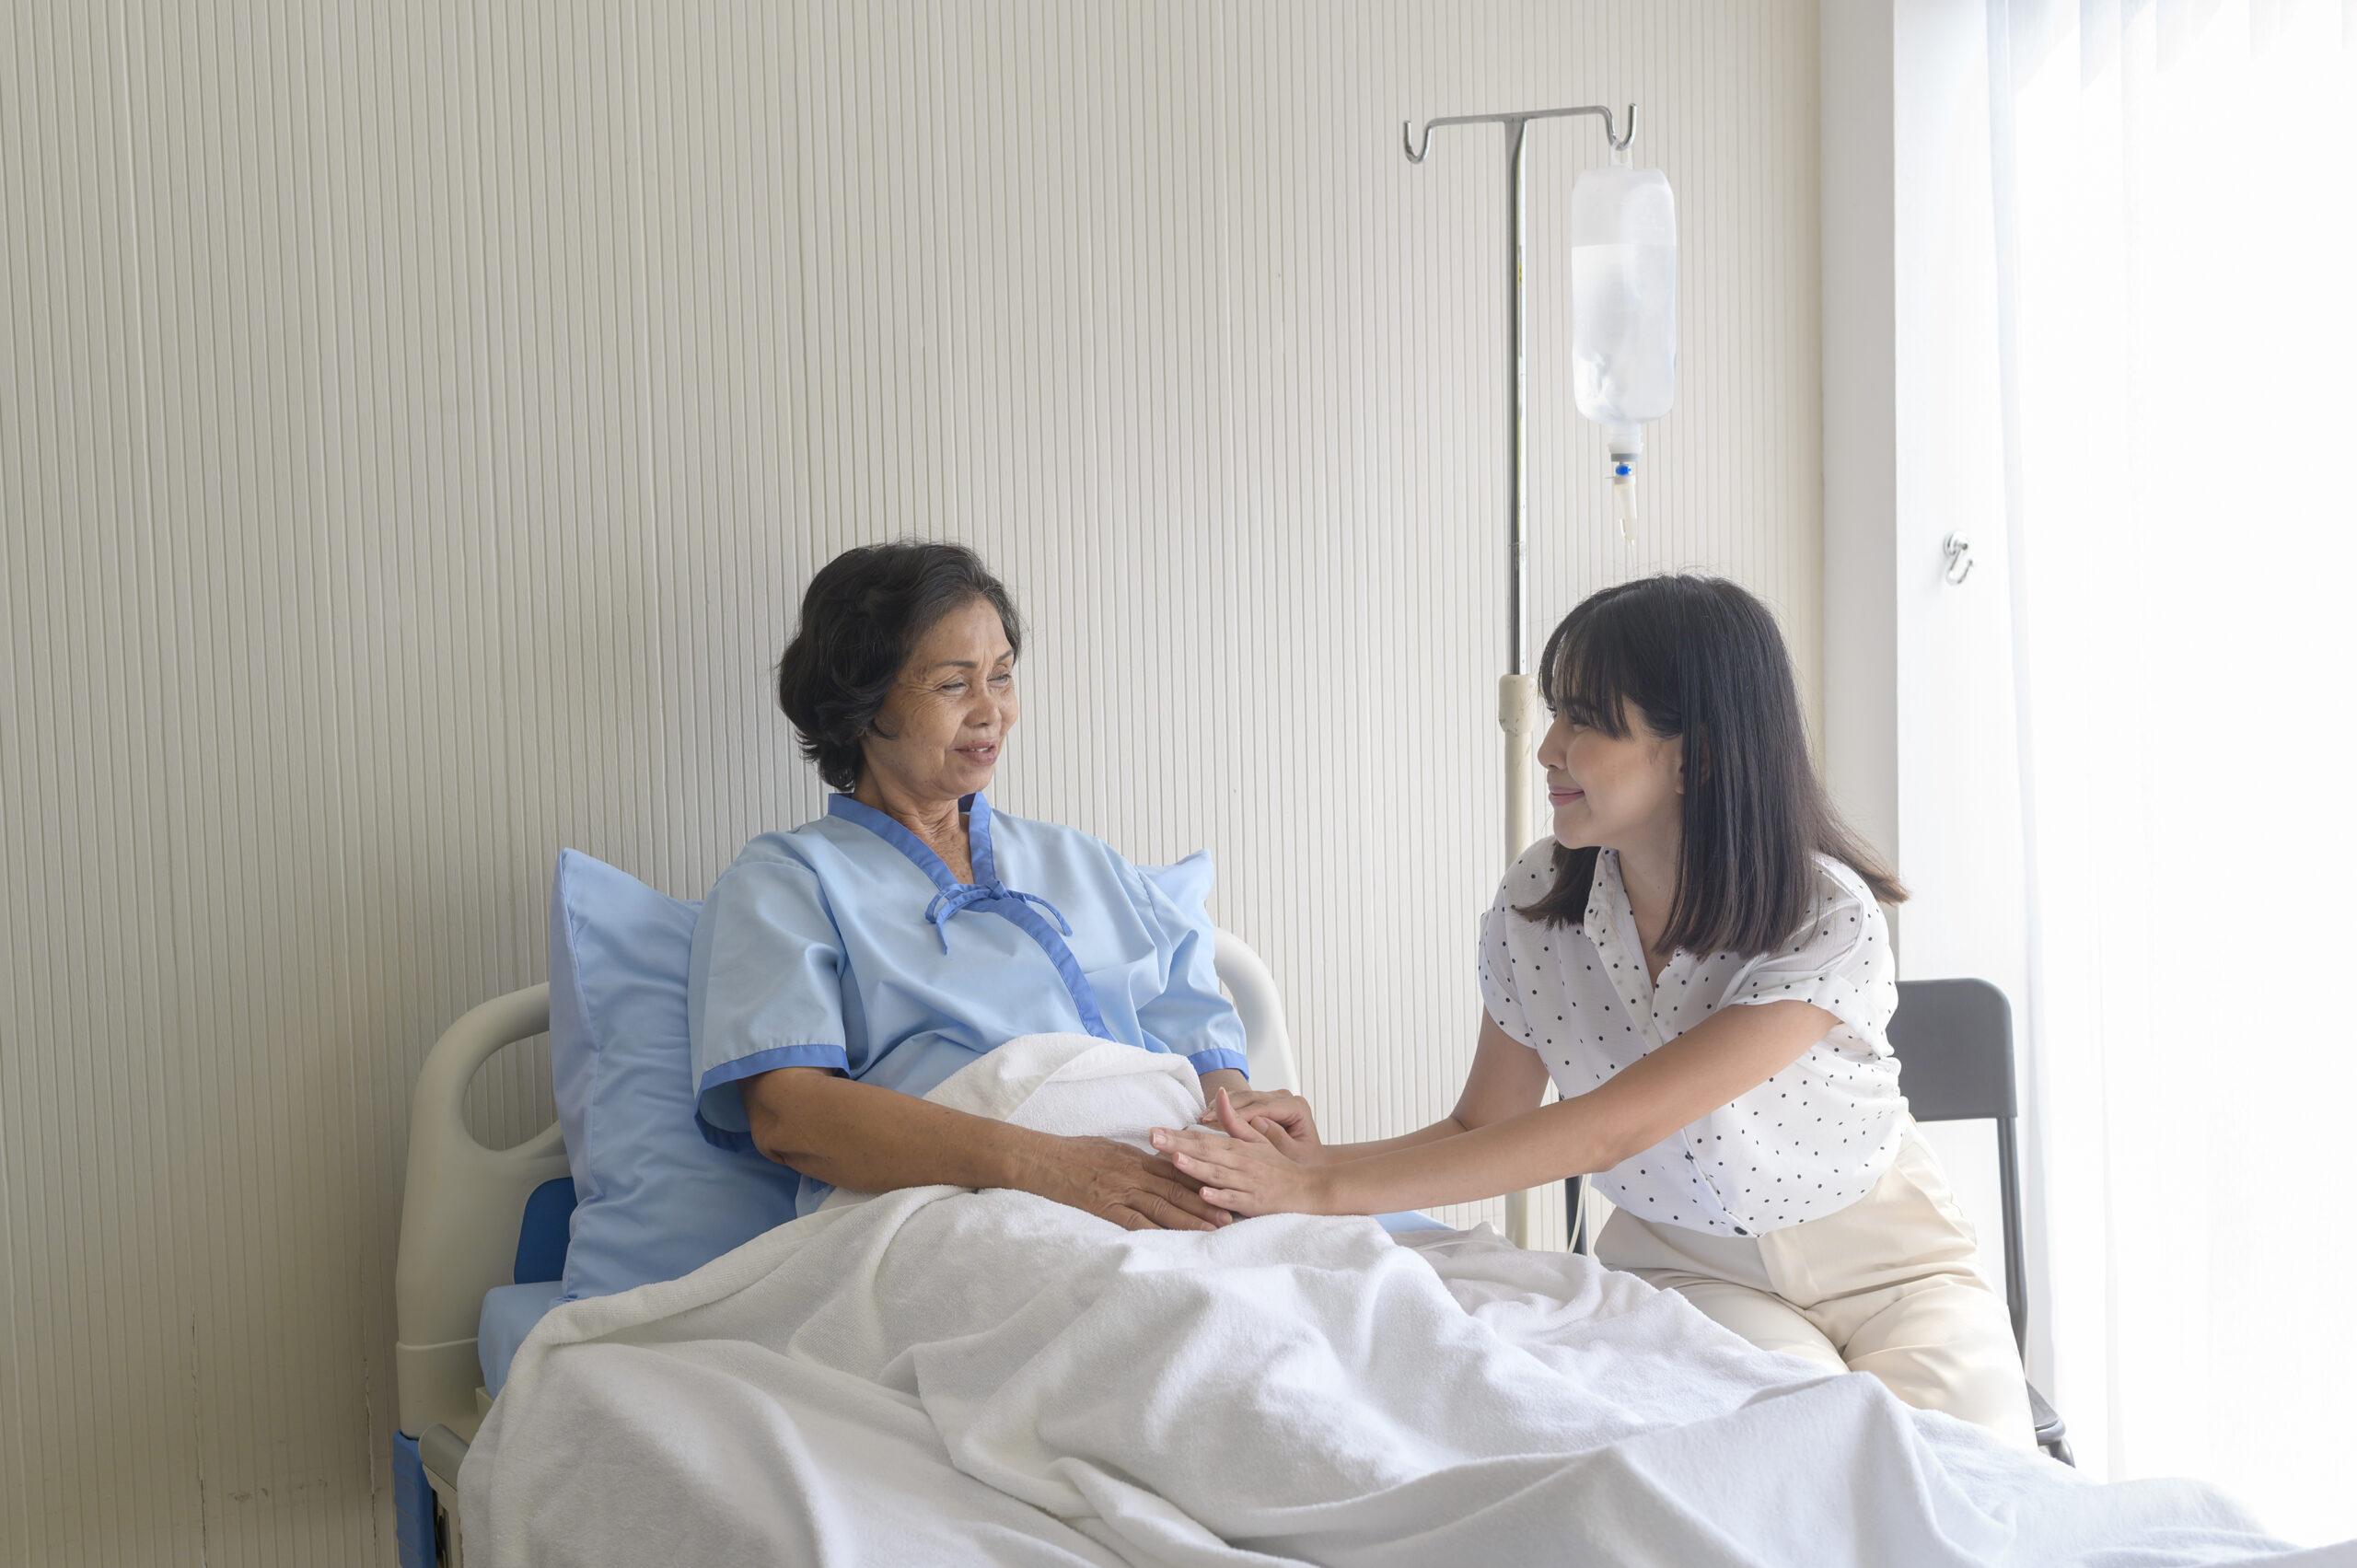 Hospice nurse helping patient with wound care